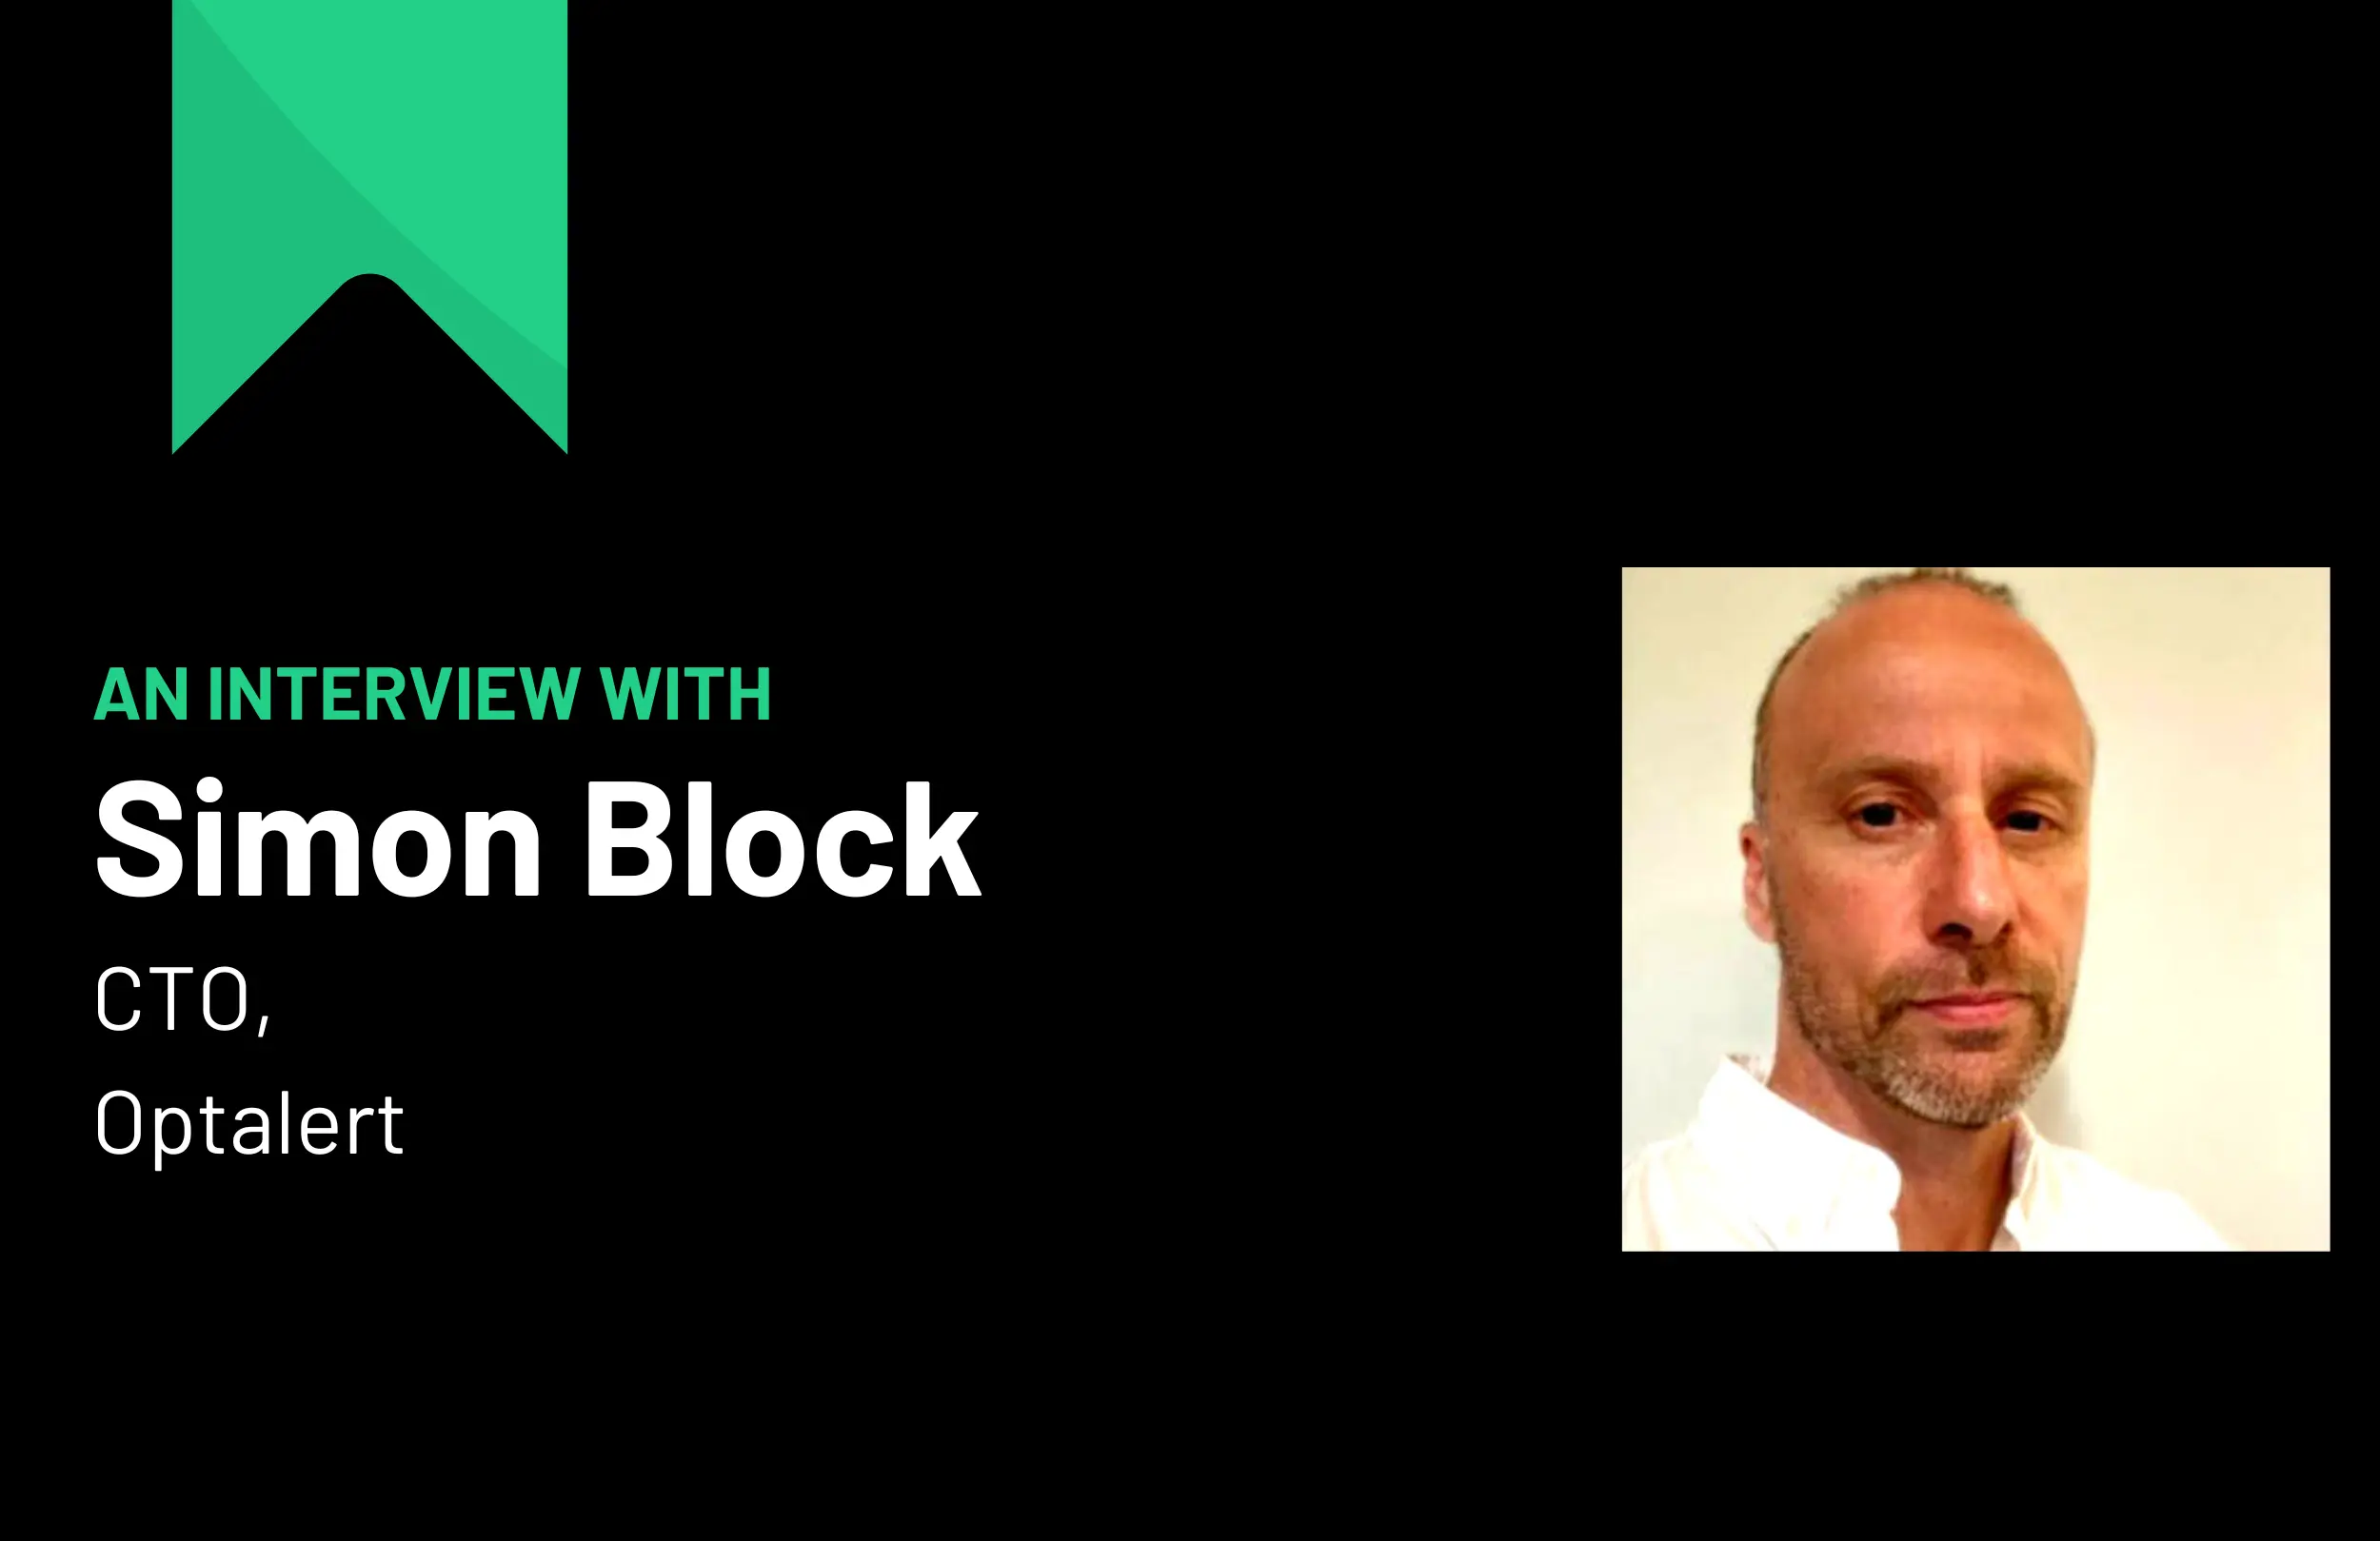 An interview with Simon Block, CTO at Optalert